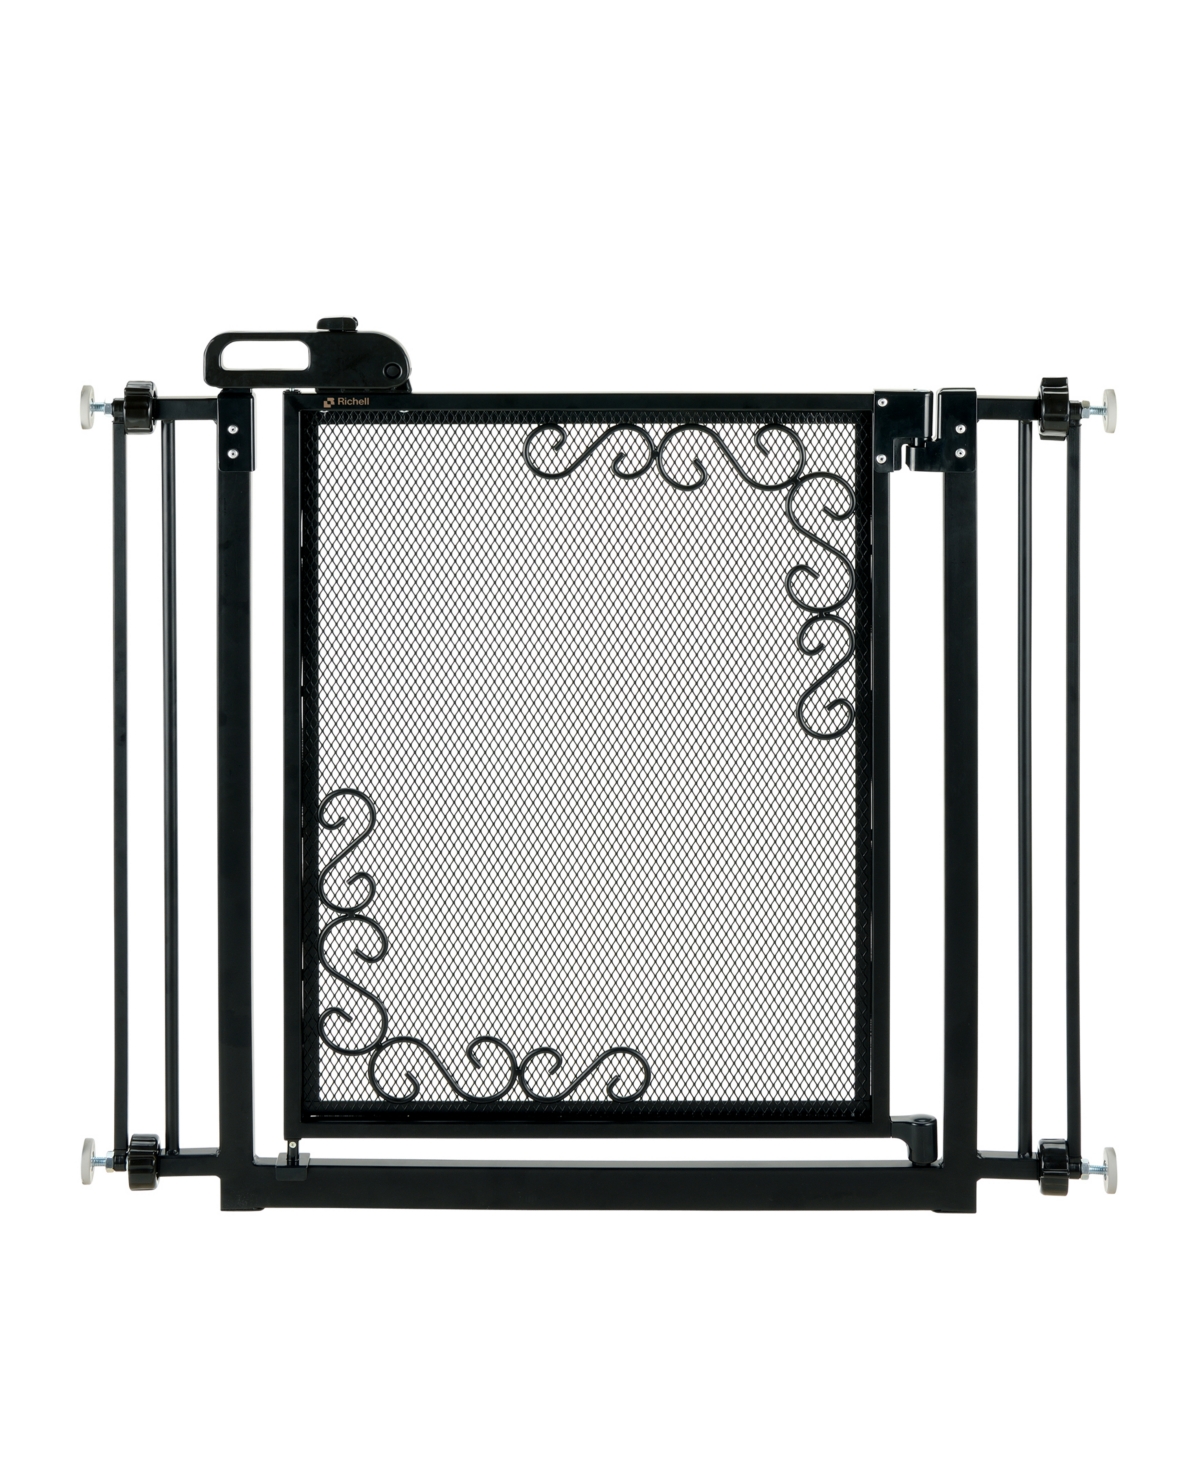 One-Touch Metal Mesh Pet Gate - Pewter